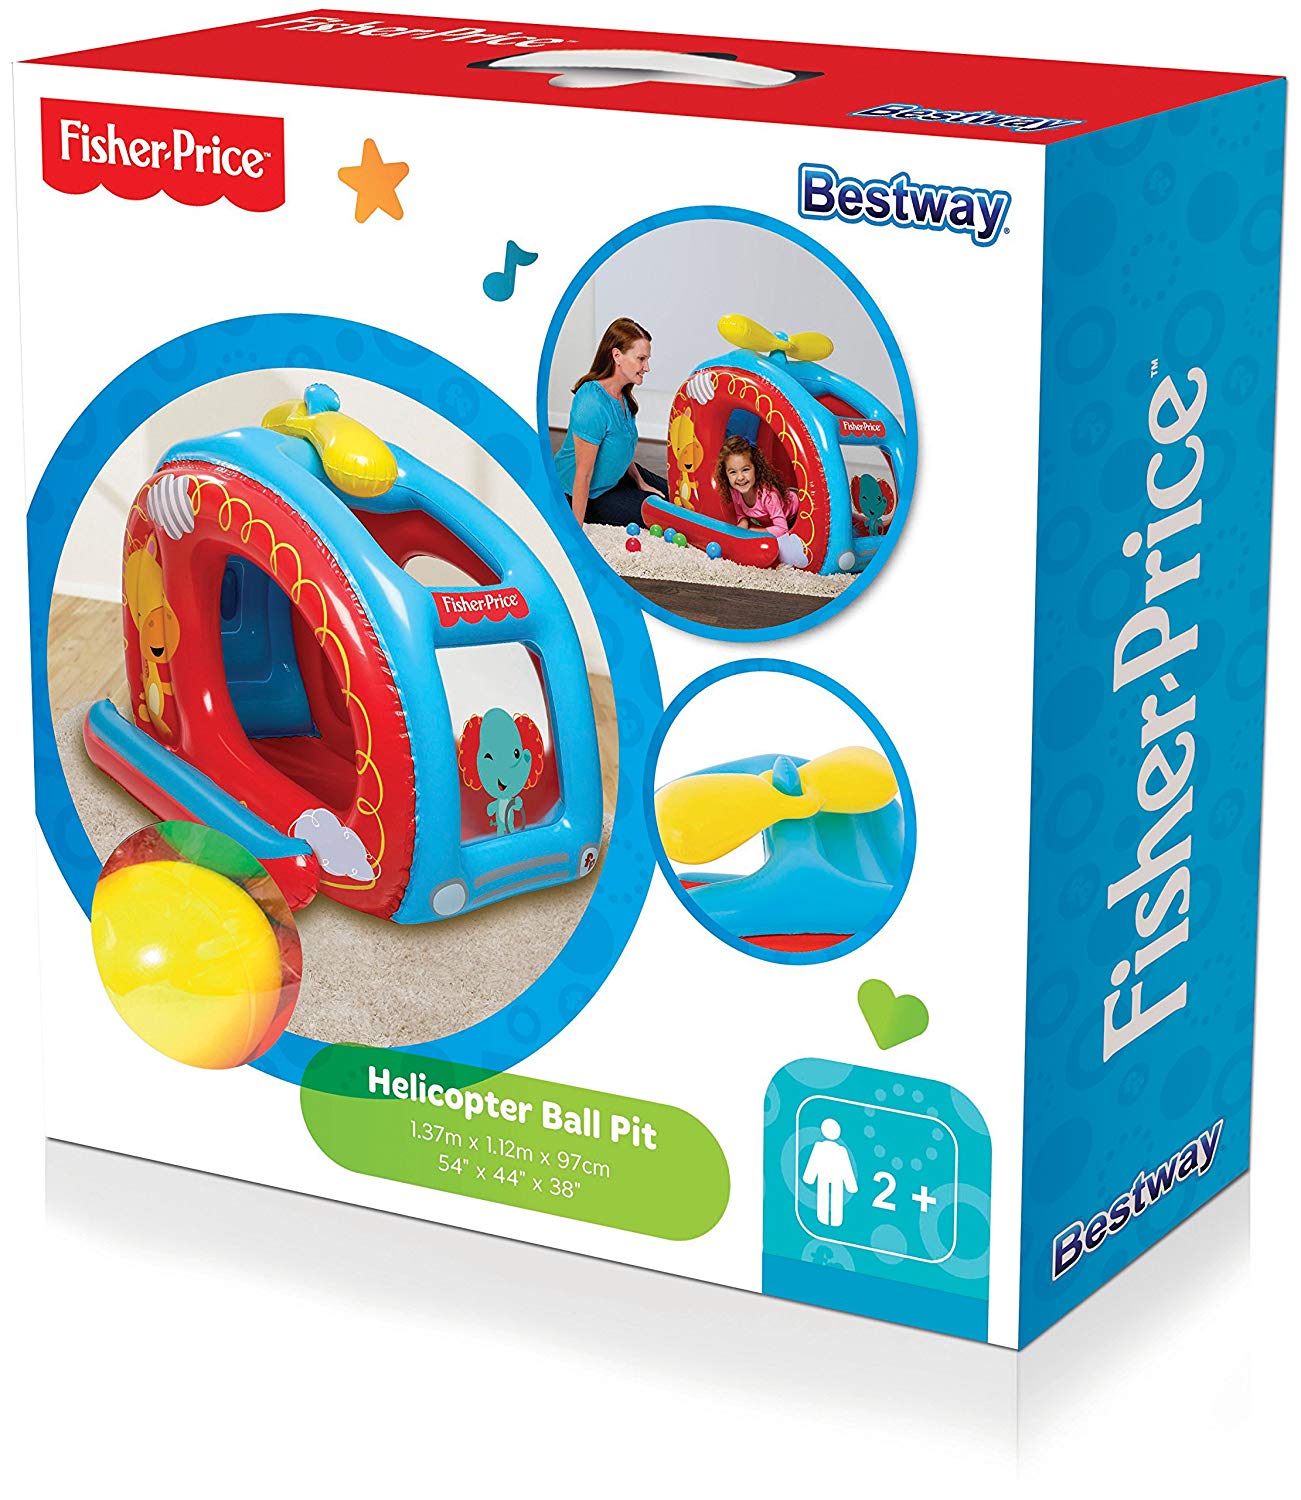 Fisher-Price - Helicopter Ball Pit (54" x 44" x 38"/1.37m x 1.12m x 97cm)